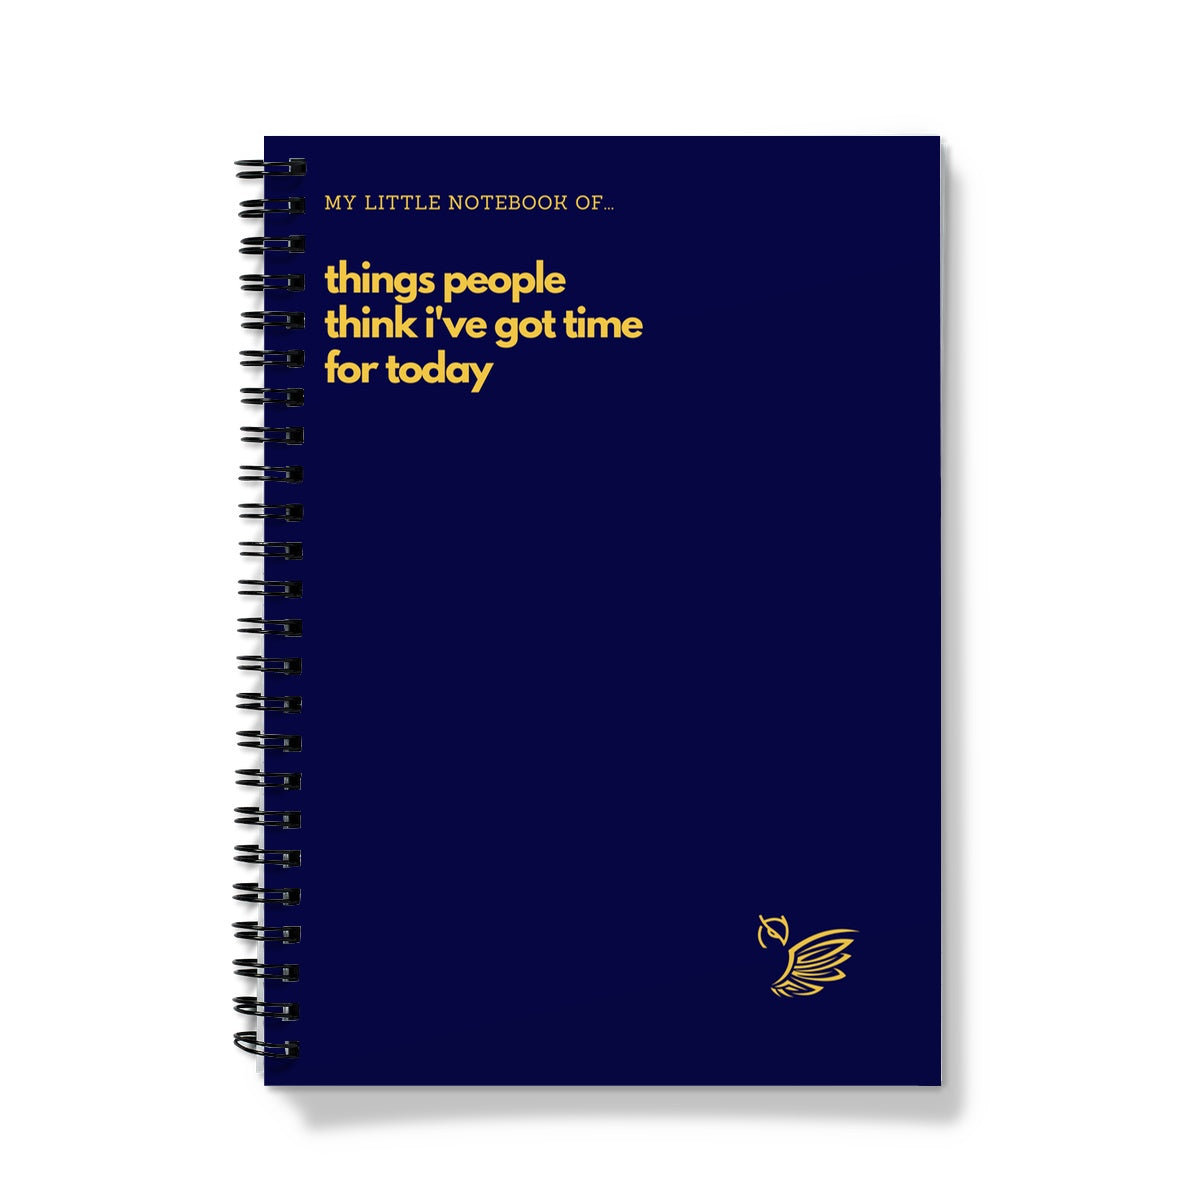 My Little Notebook of... Things People Think I've Got Time For Today Notebook